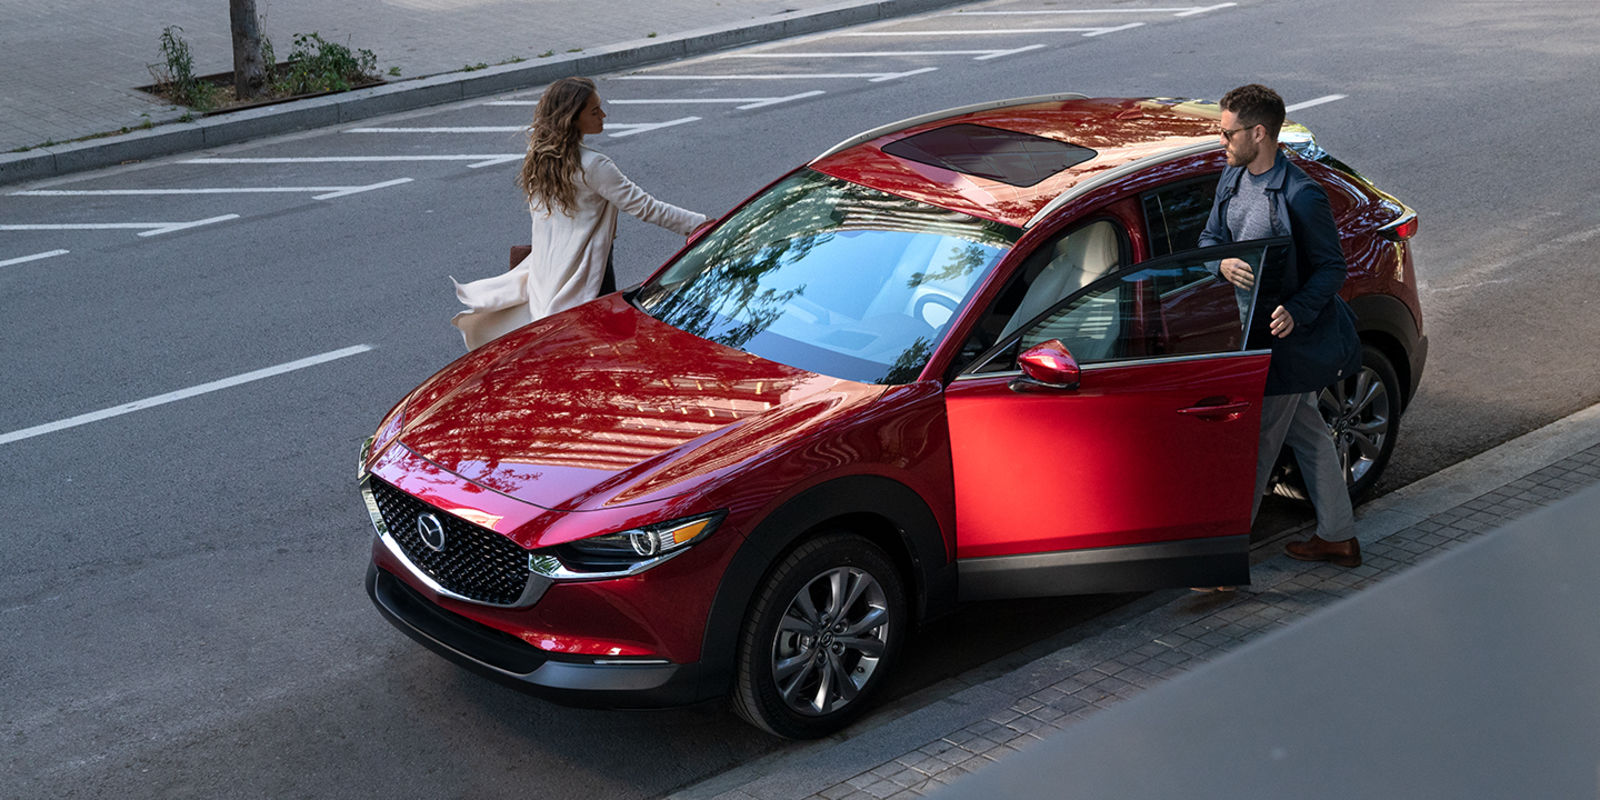 Illustration for article titled The 2020 Mazda CX-30 starts at $21,900